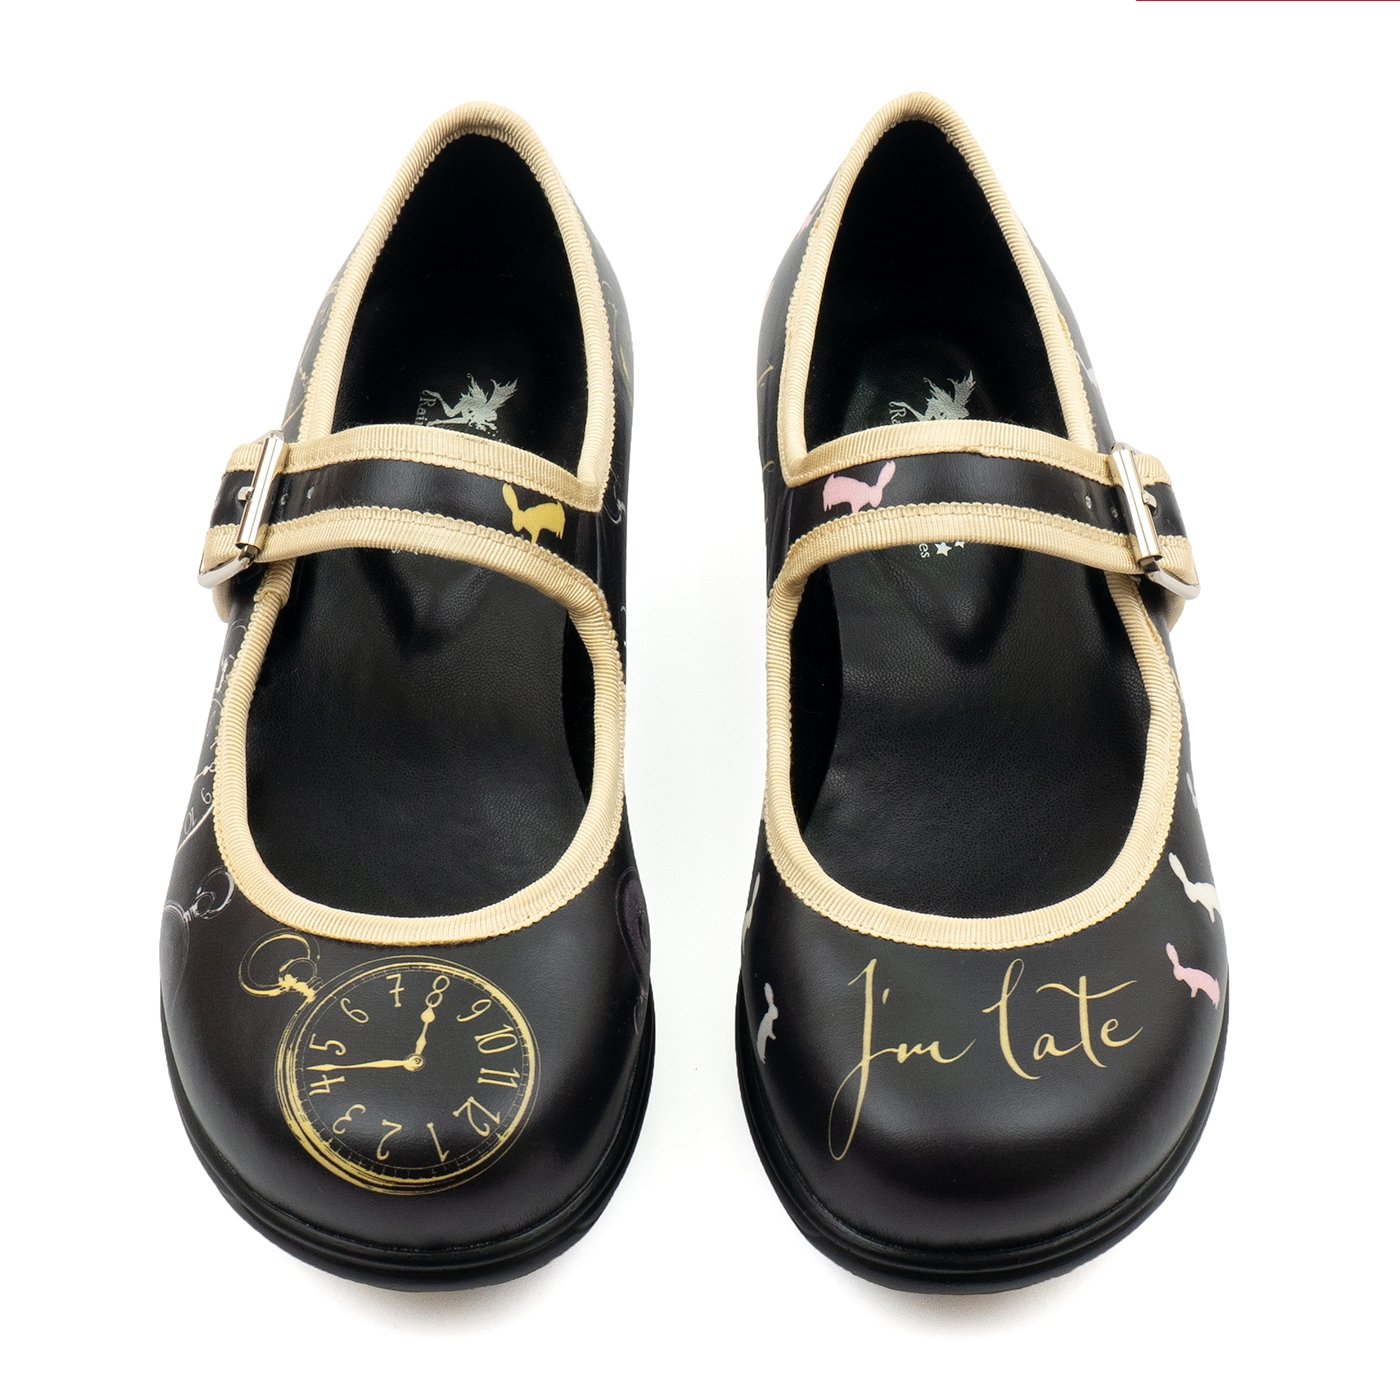 Mary Jane - I'm Late - Rockamilly-Shoes-Vintage